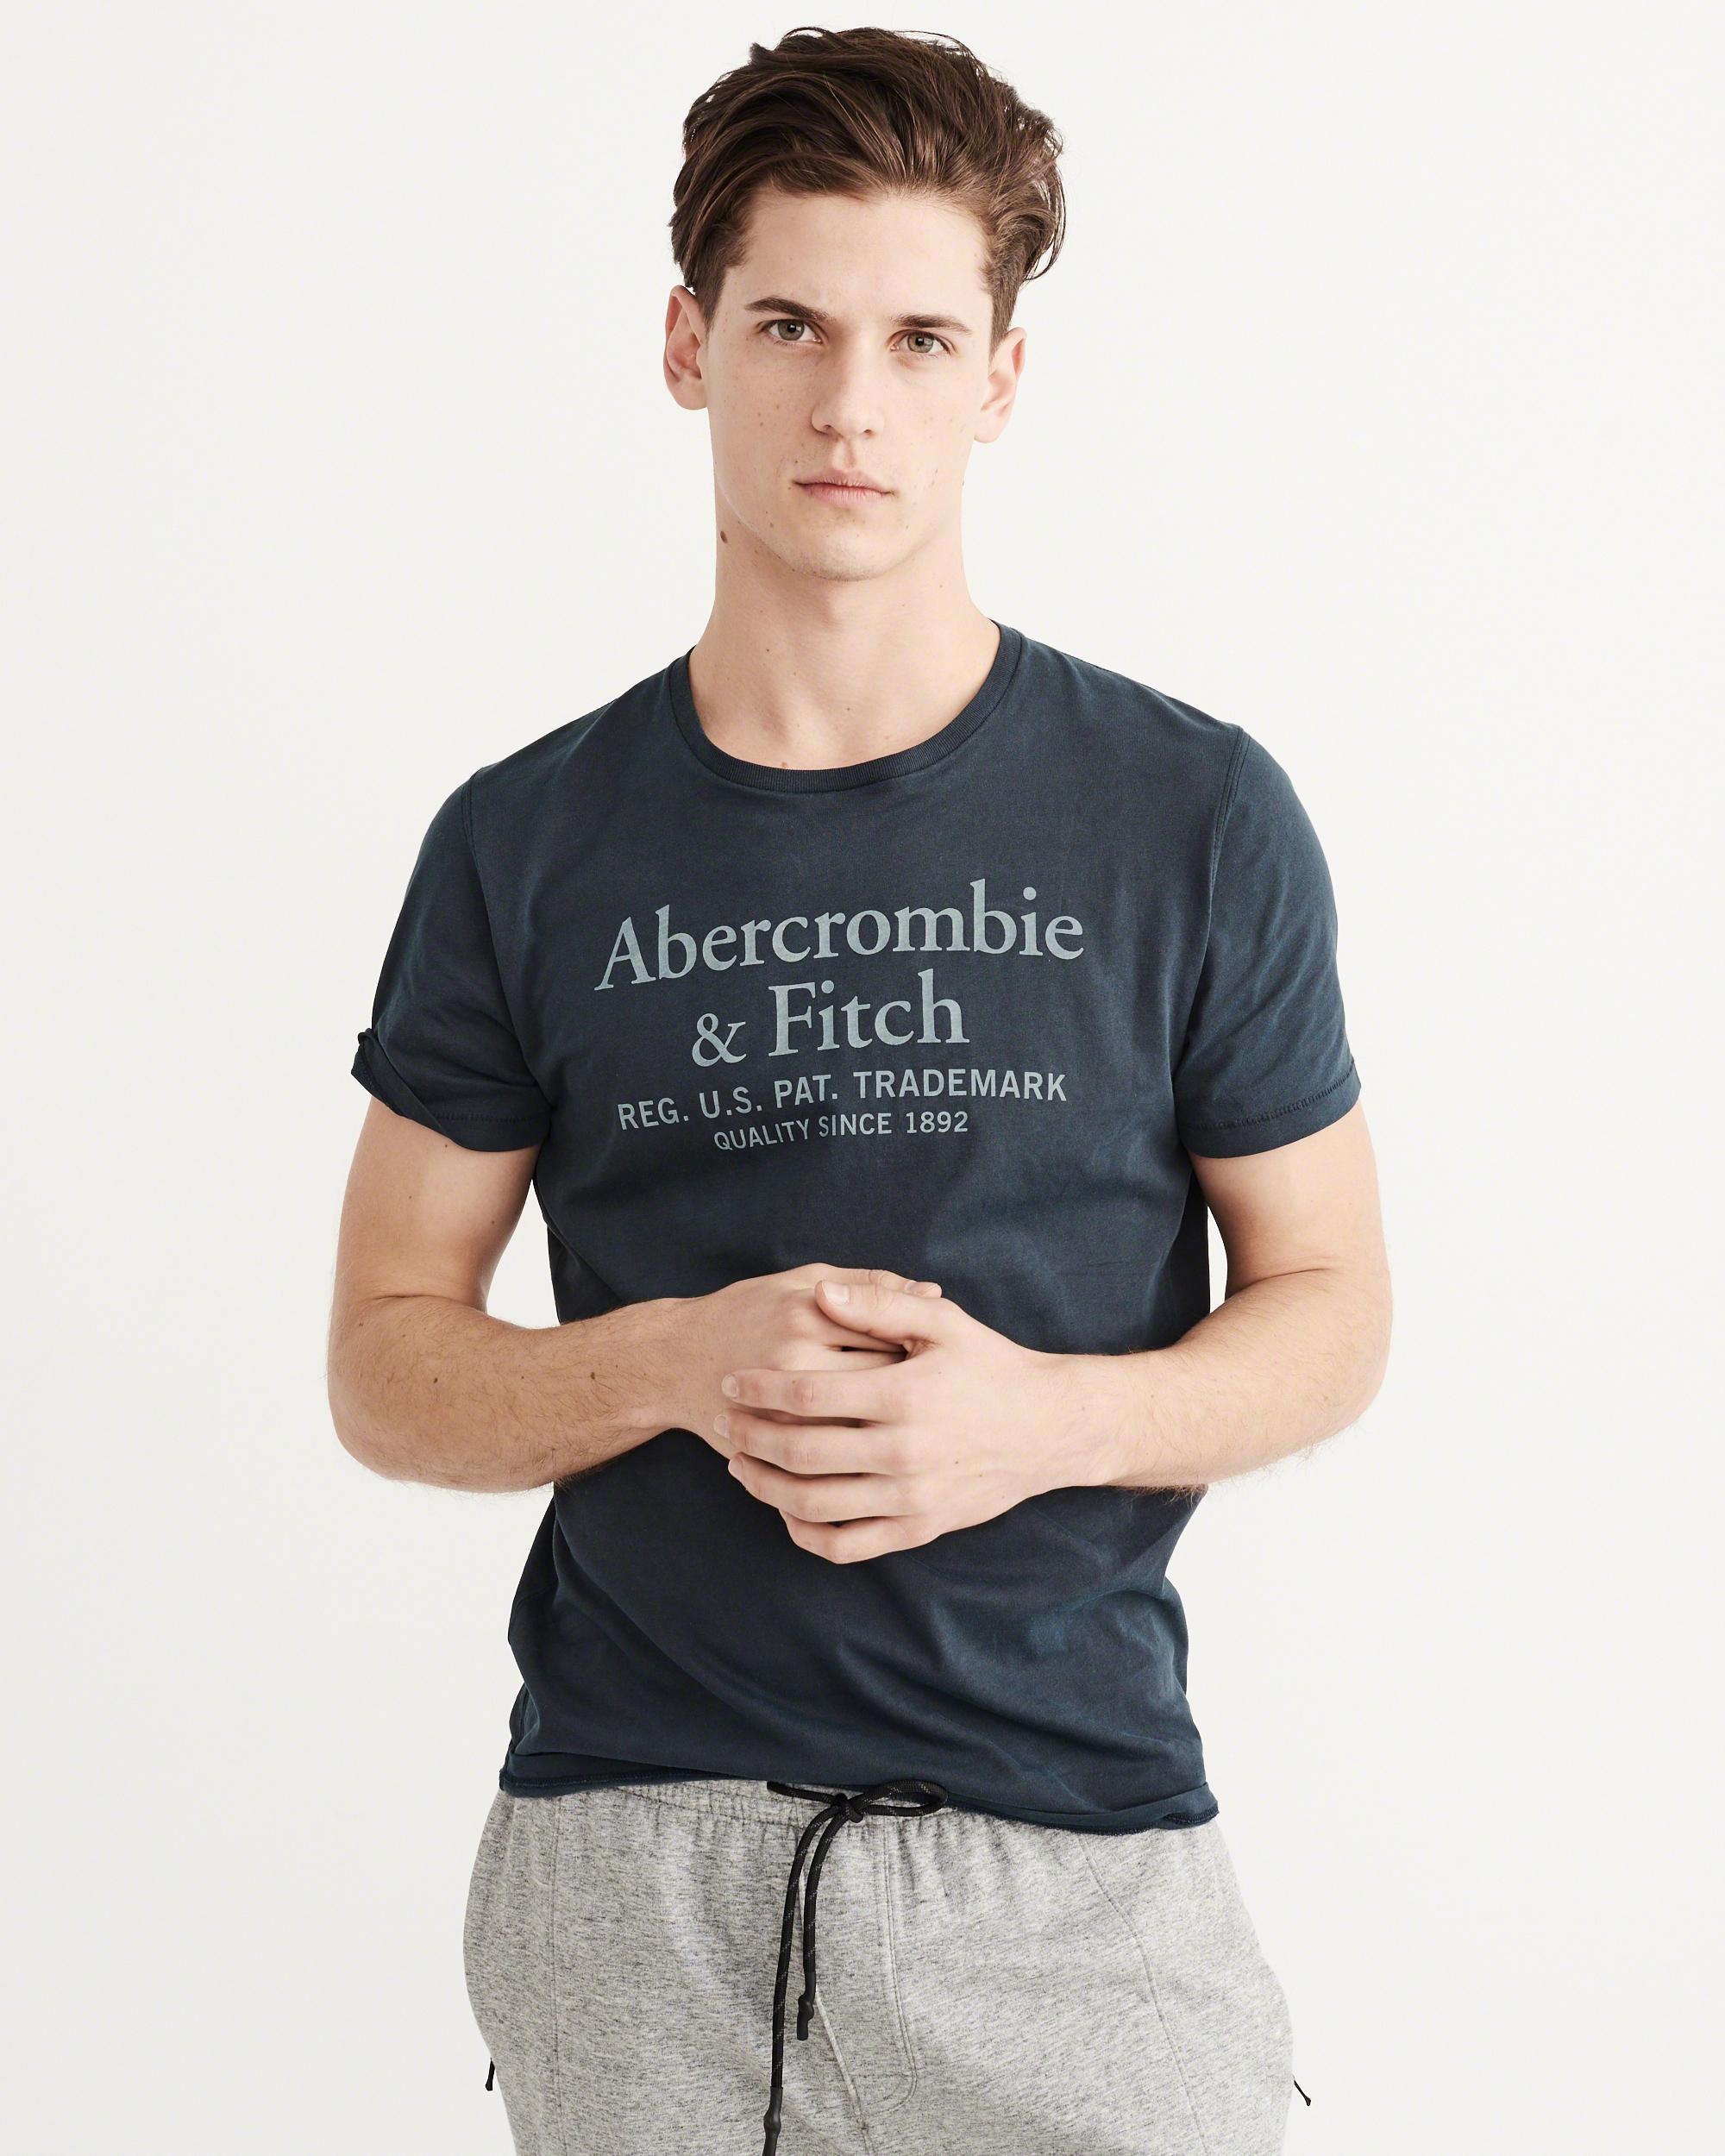 Lyst - Abercrombie & Fitch Garment Dye Graphic Tee in Blue for Men